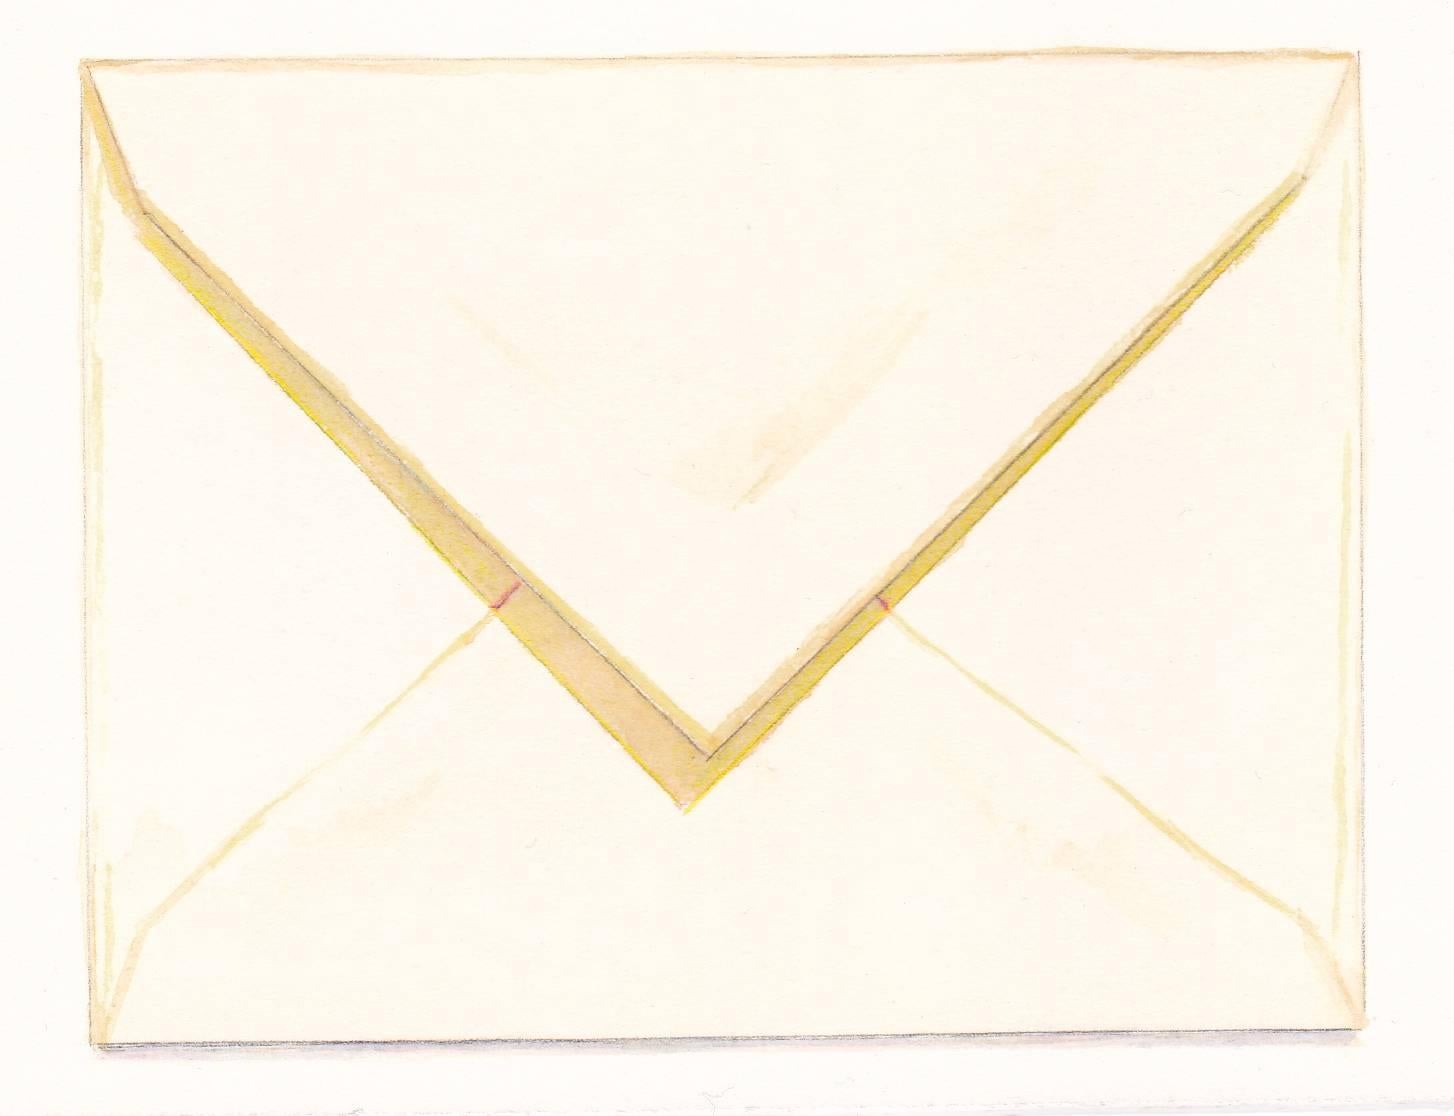 Margot Glass, Envelope with Yellow Shadow, Watercolor and pencil still life